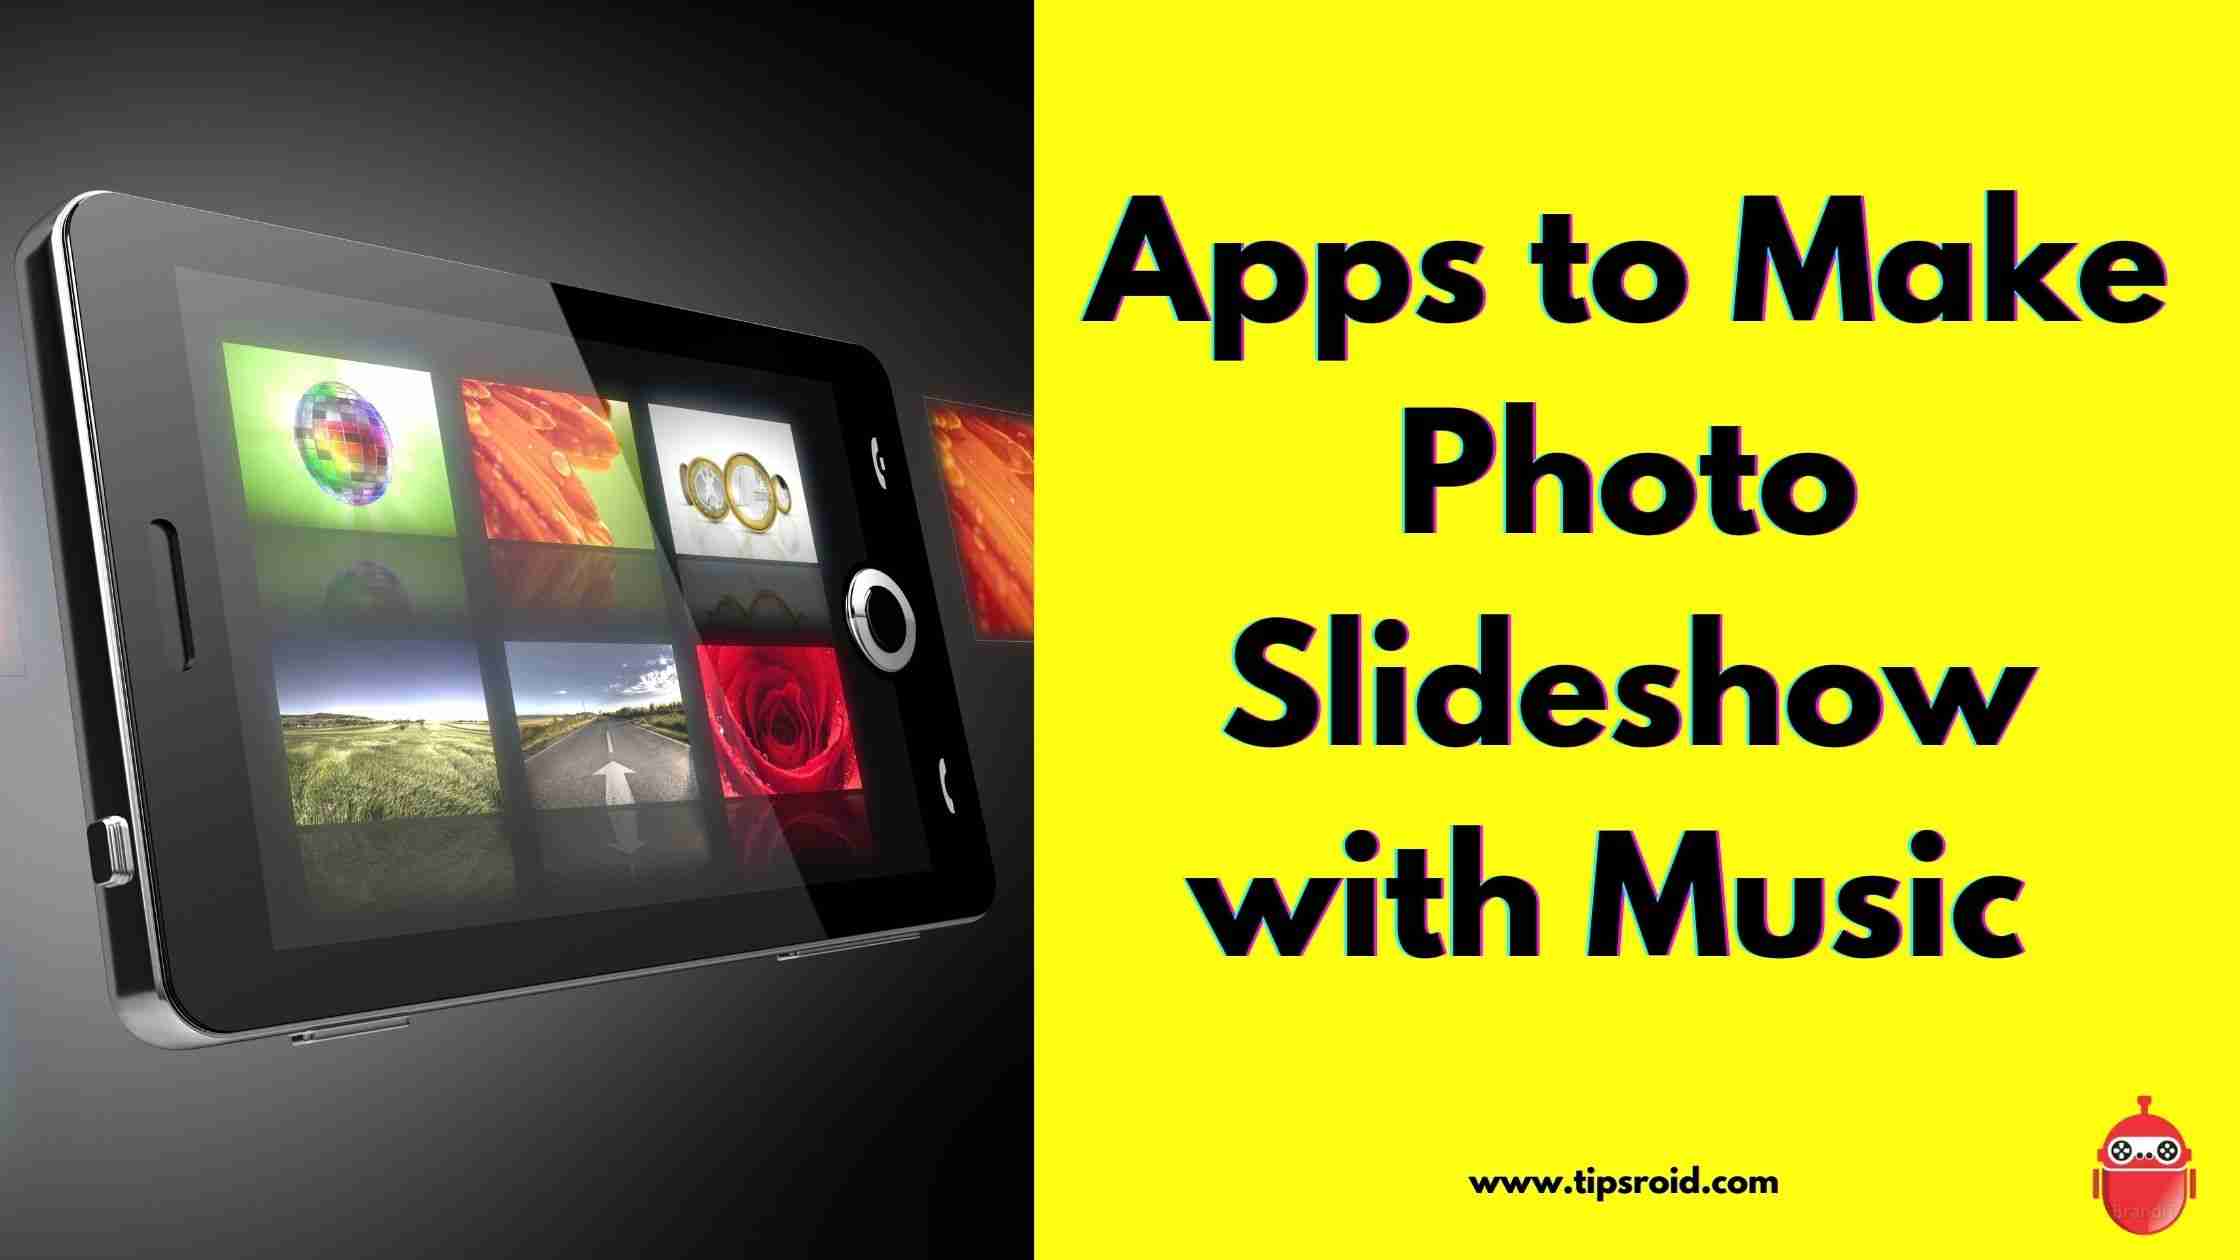 Best Picture Slideshow With Music Apps For Android and iPhone